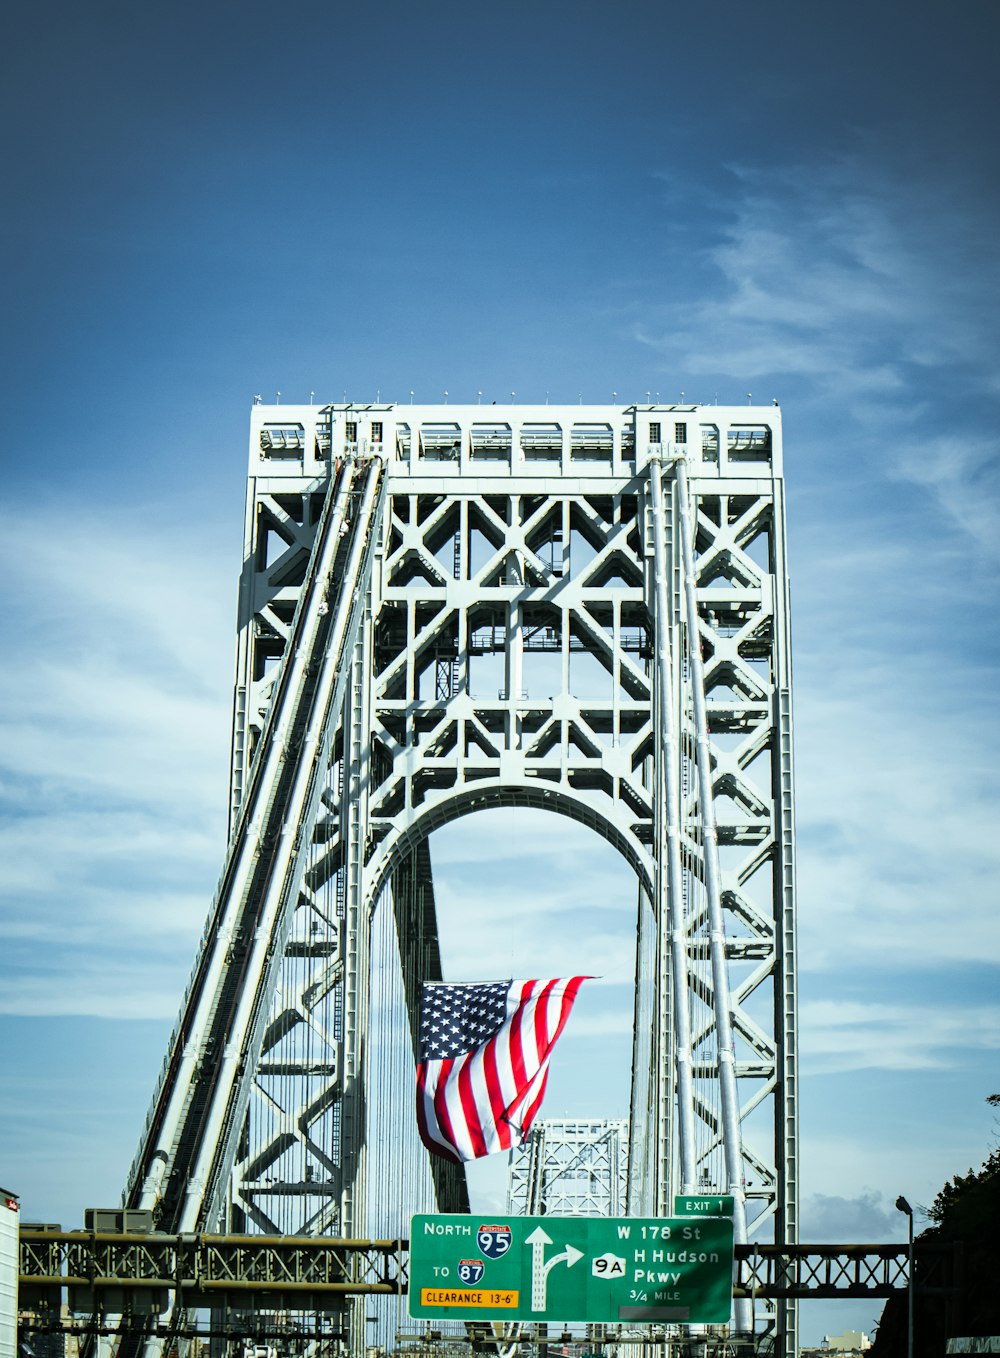 an american flag flying on the side of a bridge